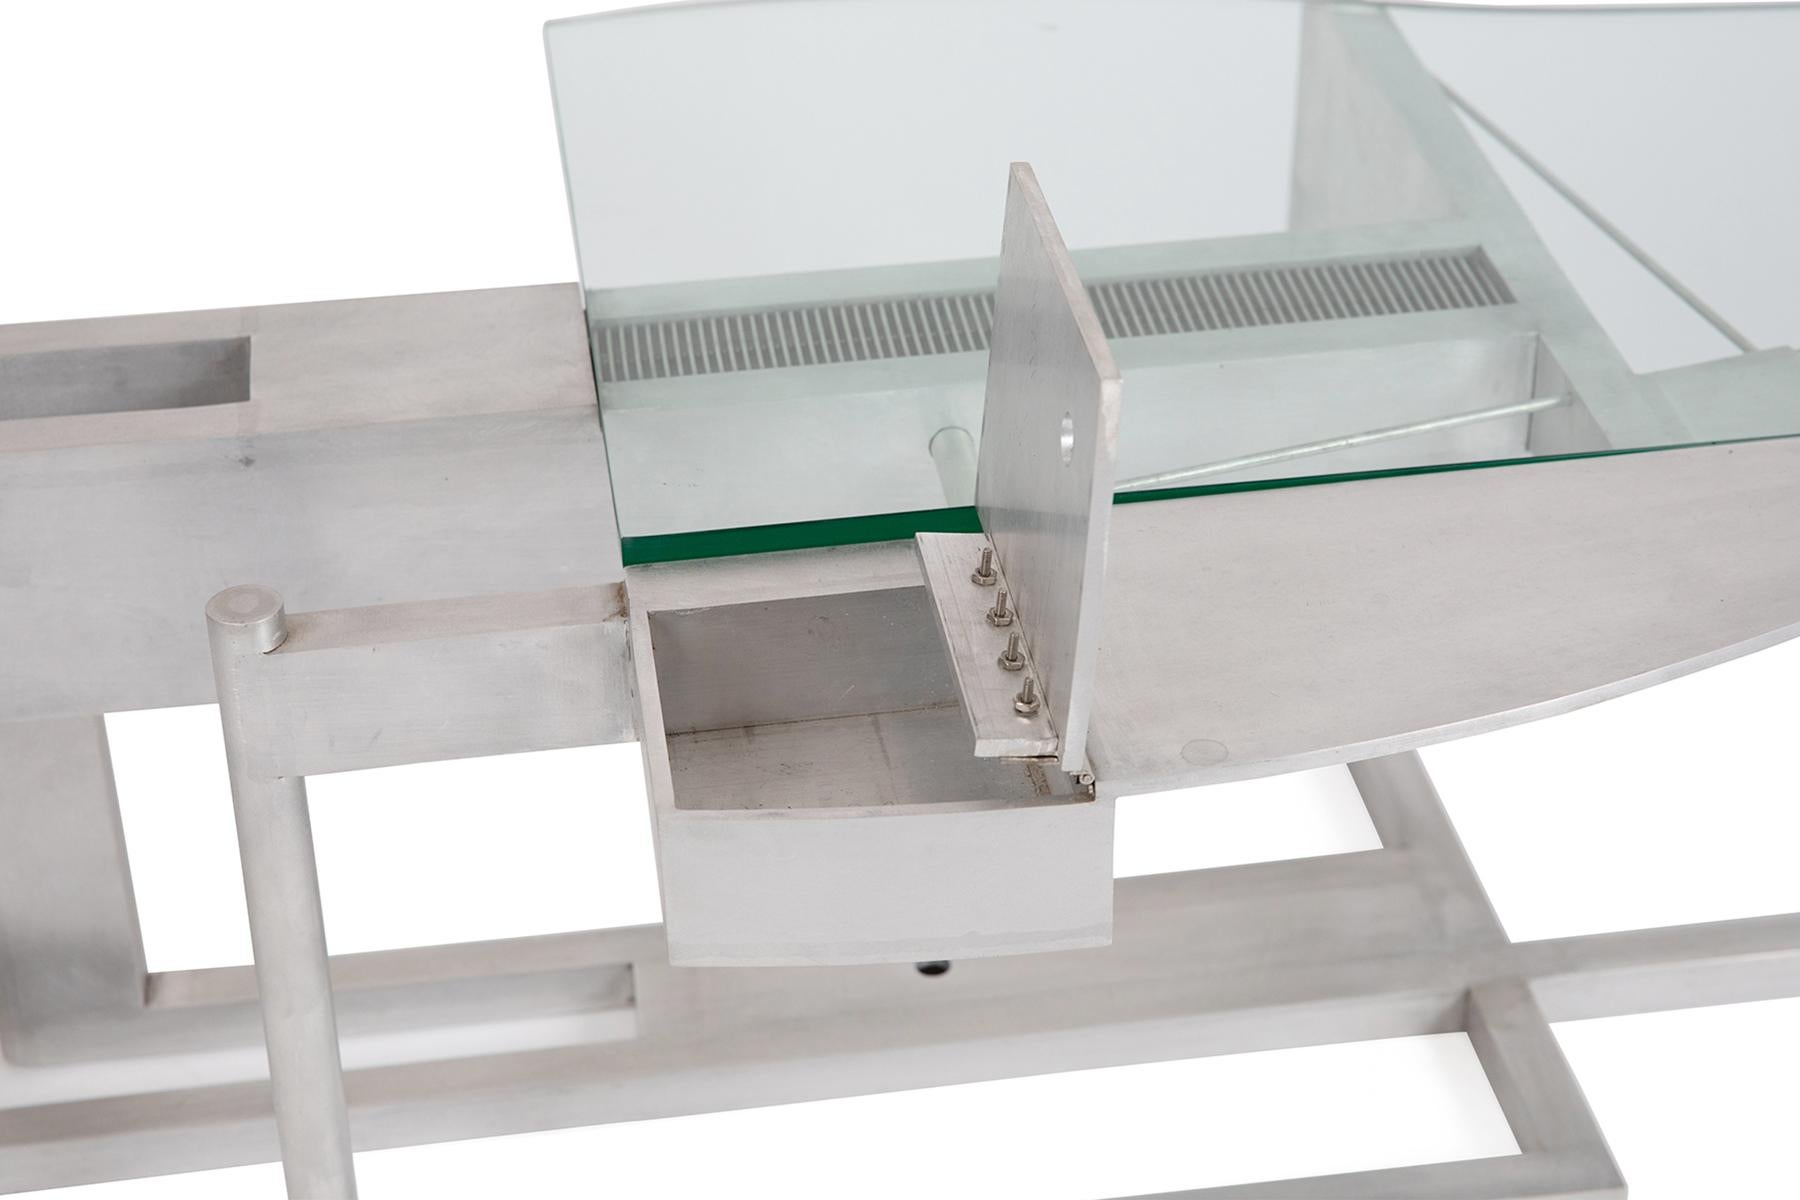 American Robert Whitton Prototype Coffeetable in Aluminum and Glass